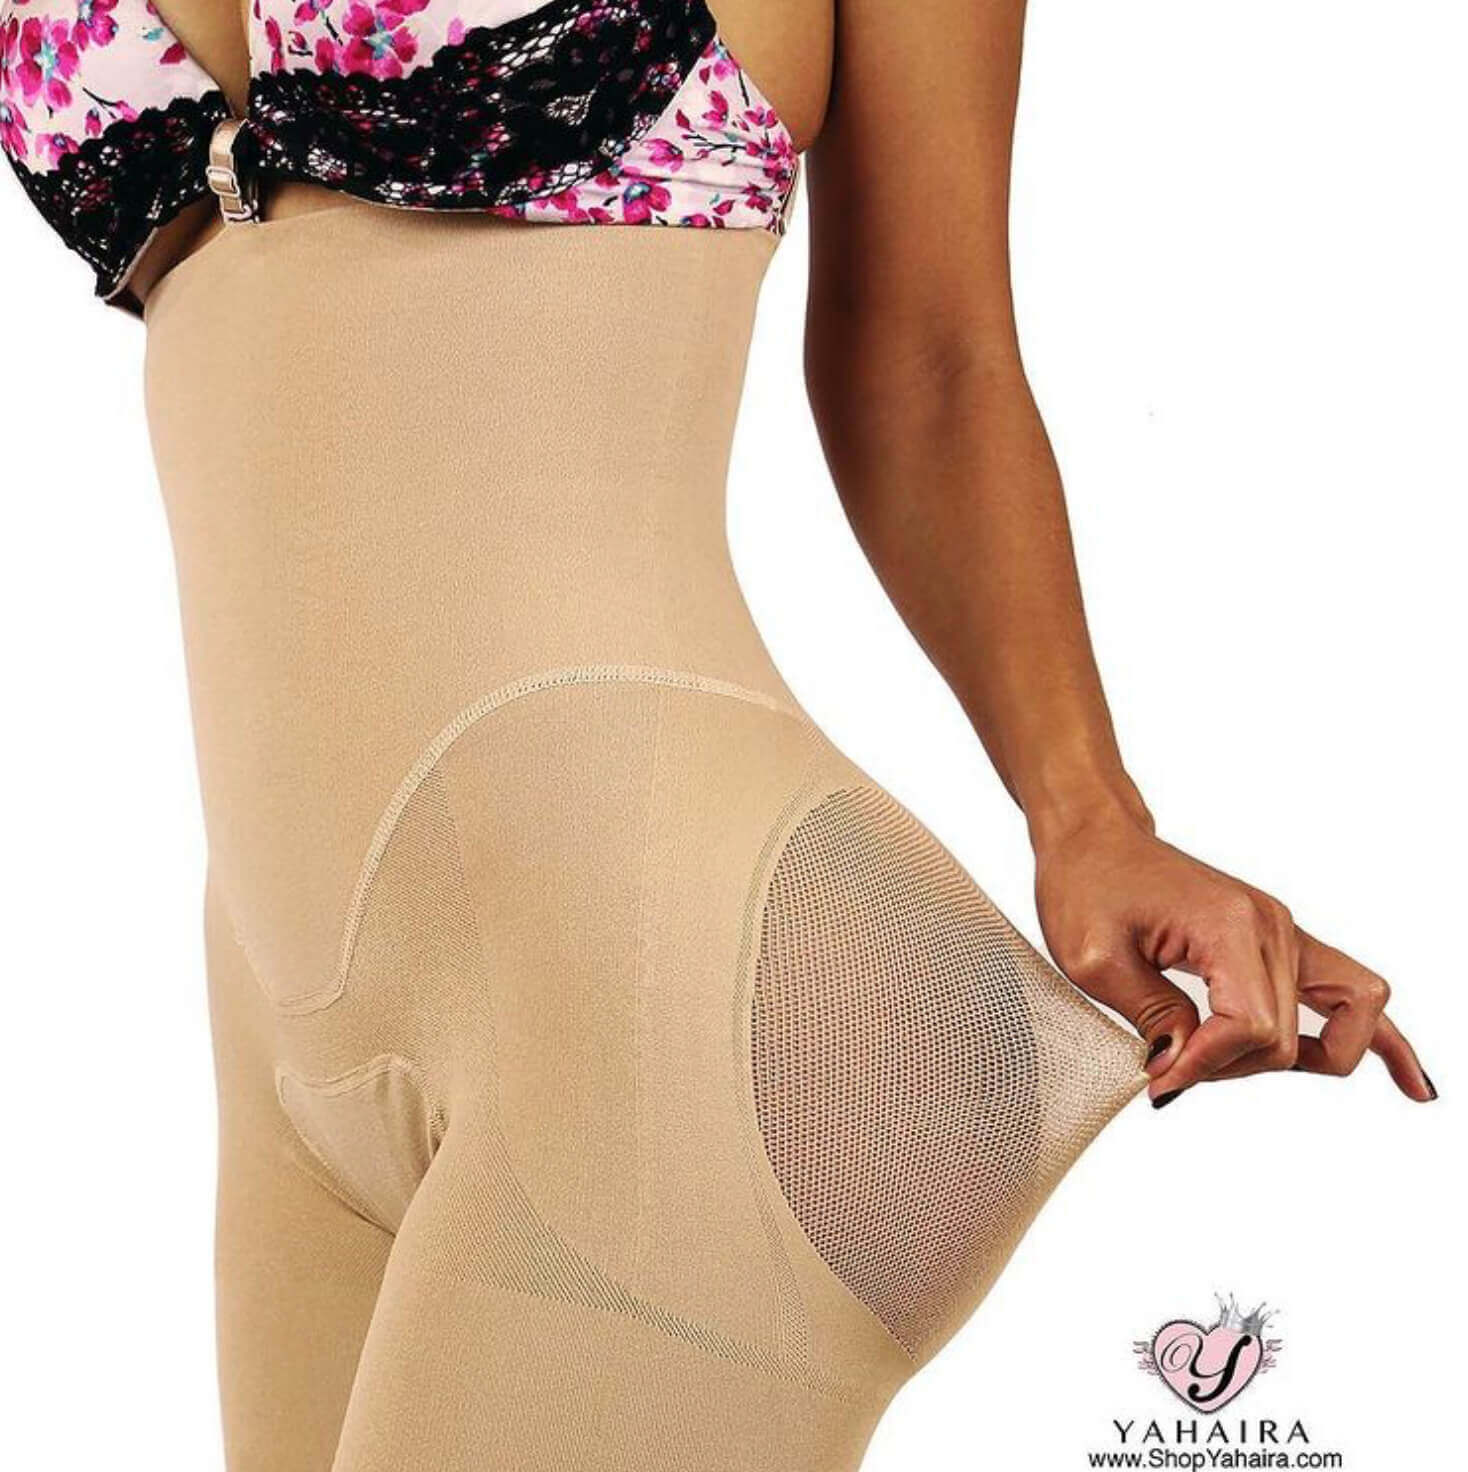 The new hi tech shapewear by Cifra – Inclusive and eco-friendly